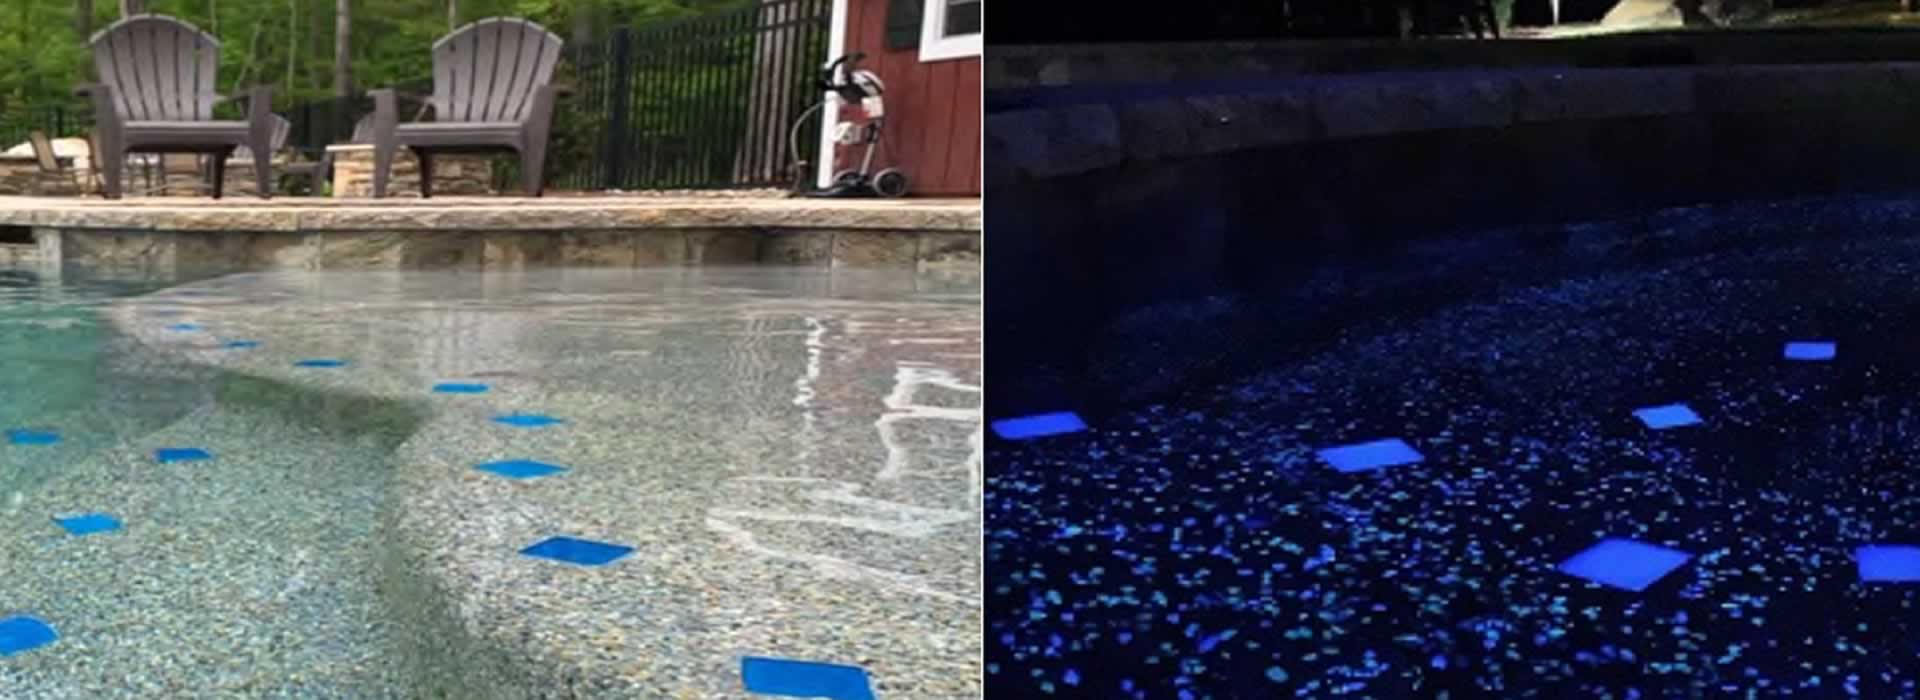 GLOW IN THE DARK MOSAICS AND TILE